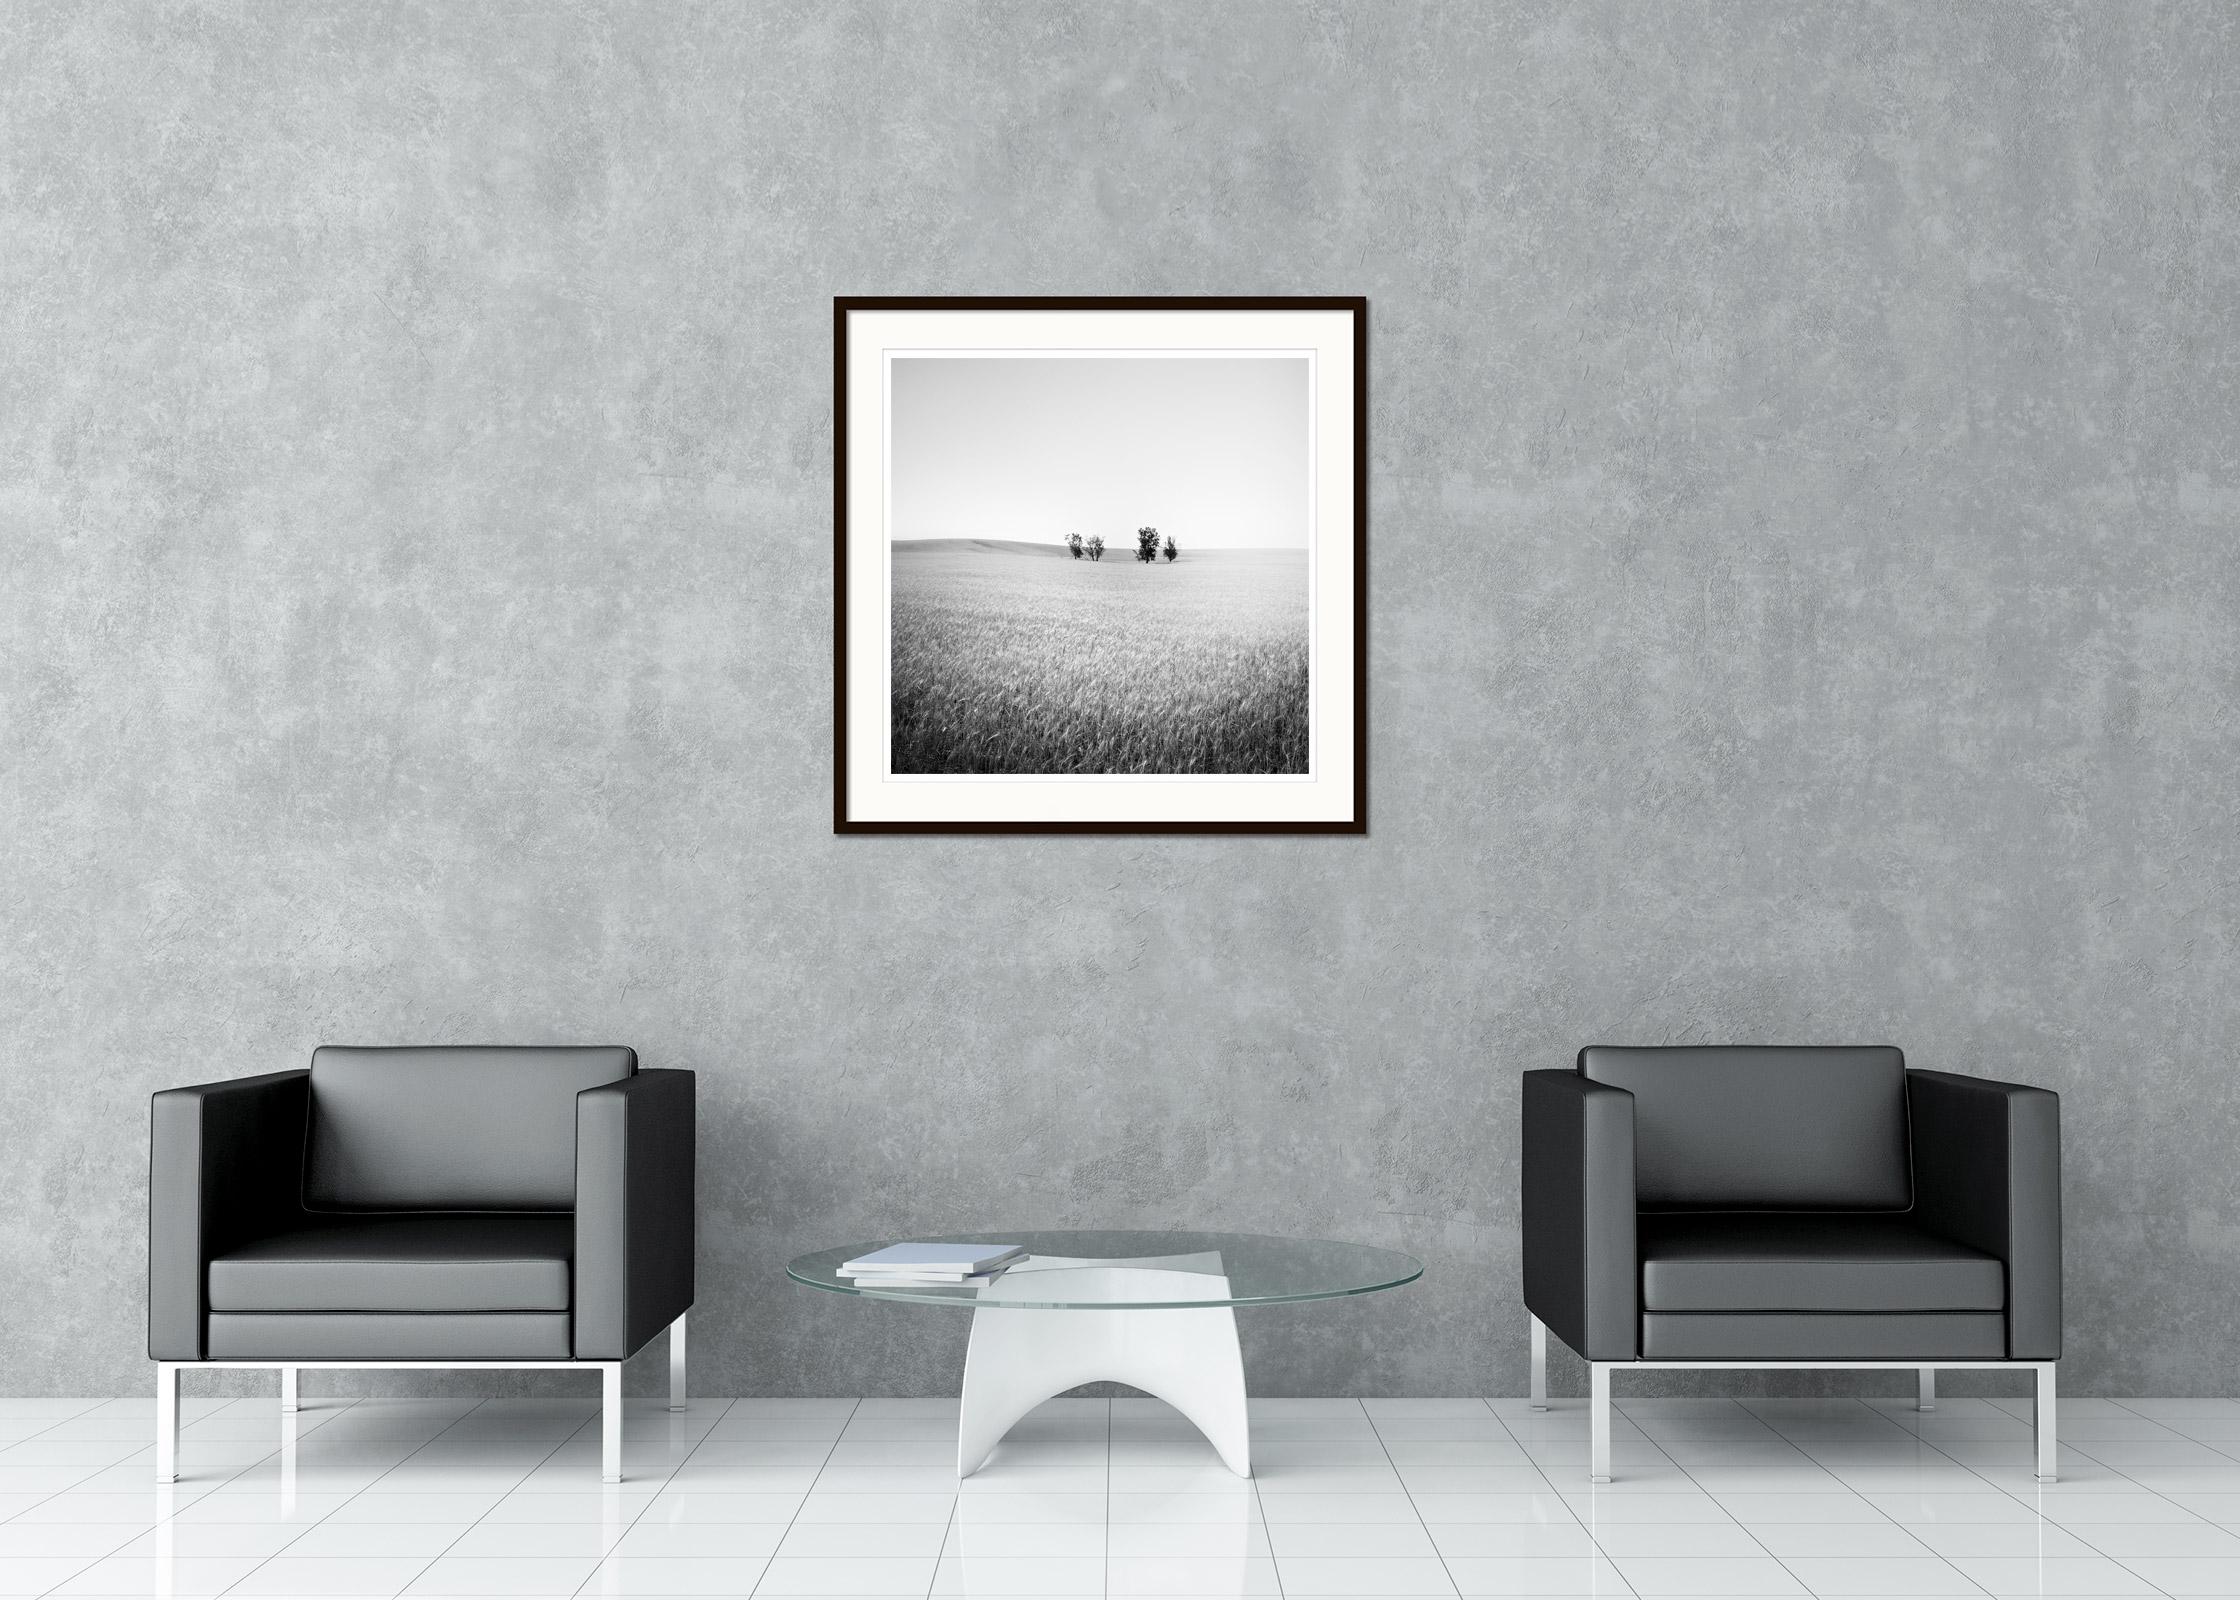 Gerald Berghammer - Limited edition of 9.
Archival fine art pigment print. Signed, titled, dated and numbered by artist. Certificate of authenticity included. Printed with 4cm white border.
15.75 x 15.75 in. (40 x 40 cm) edition of 9
23.63 x 23.63